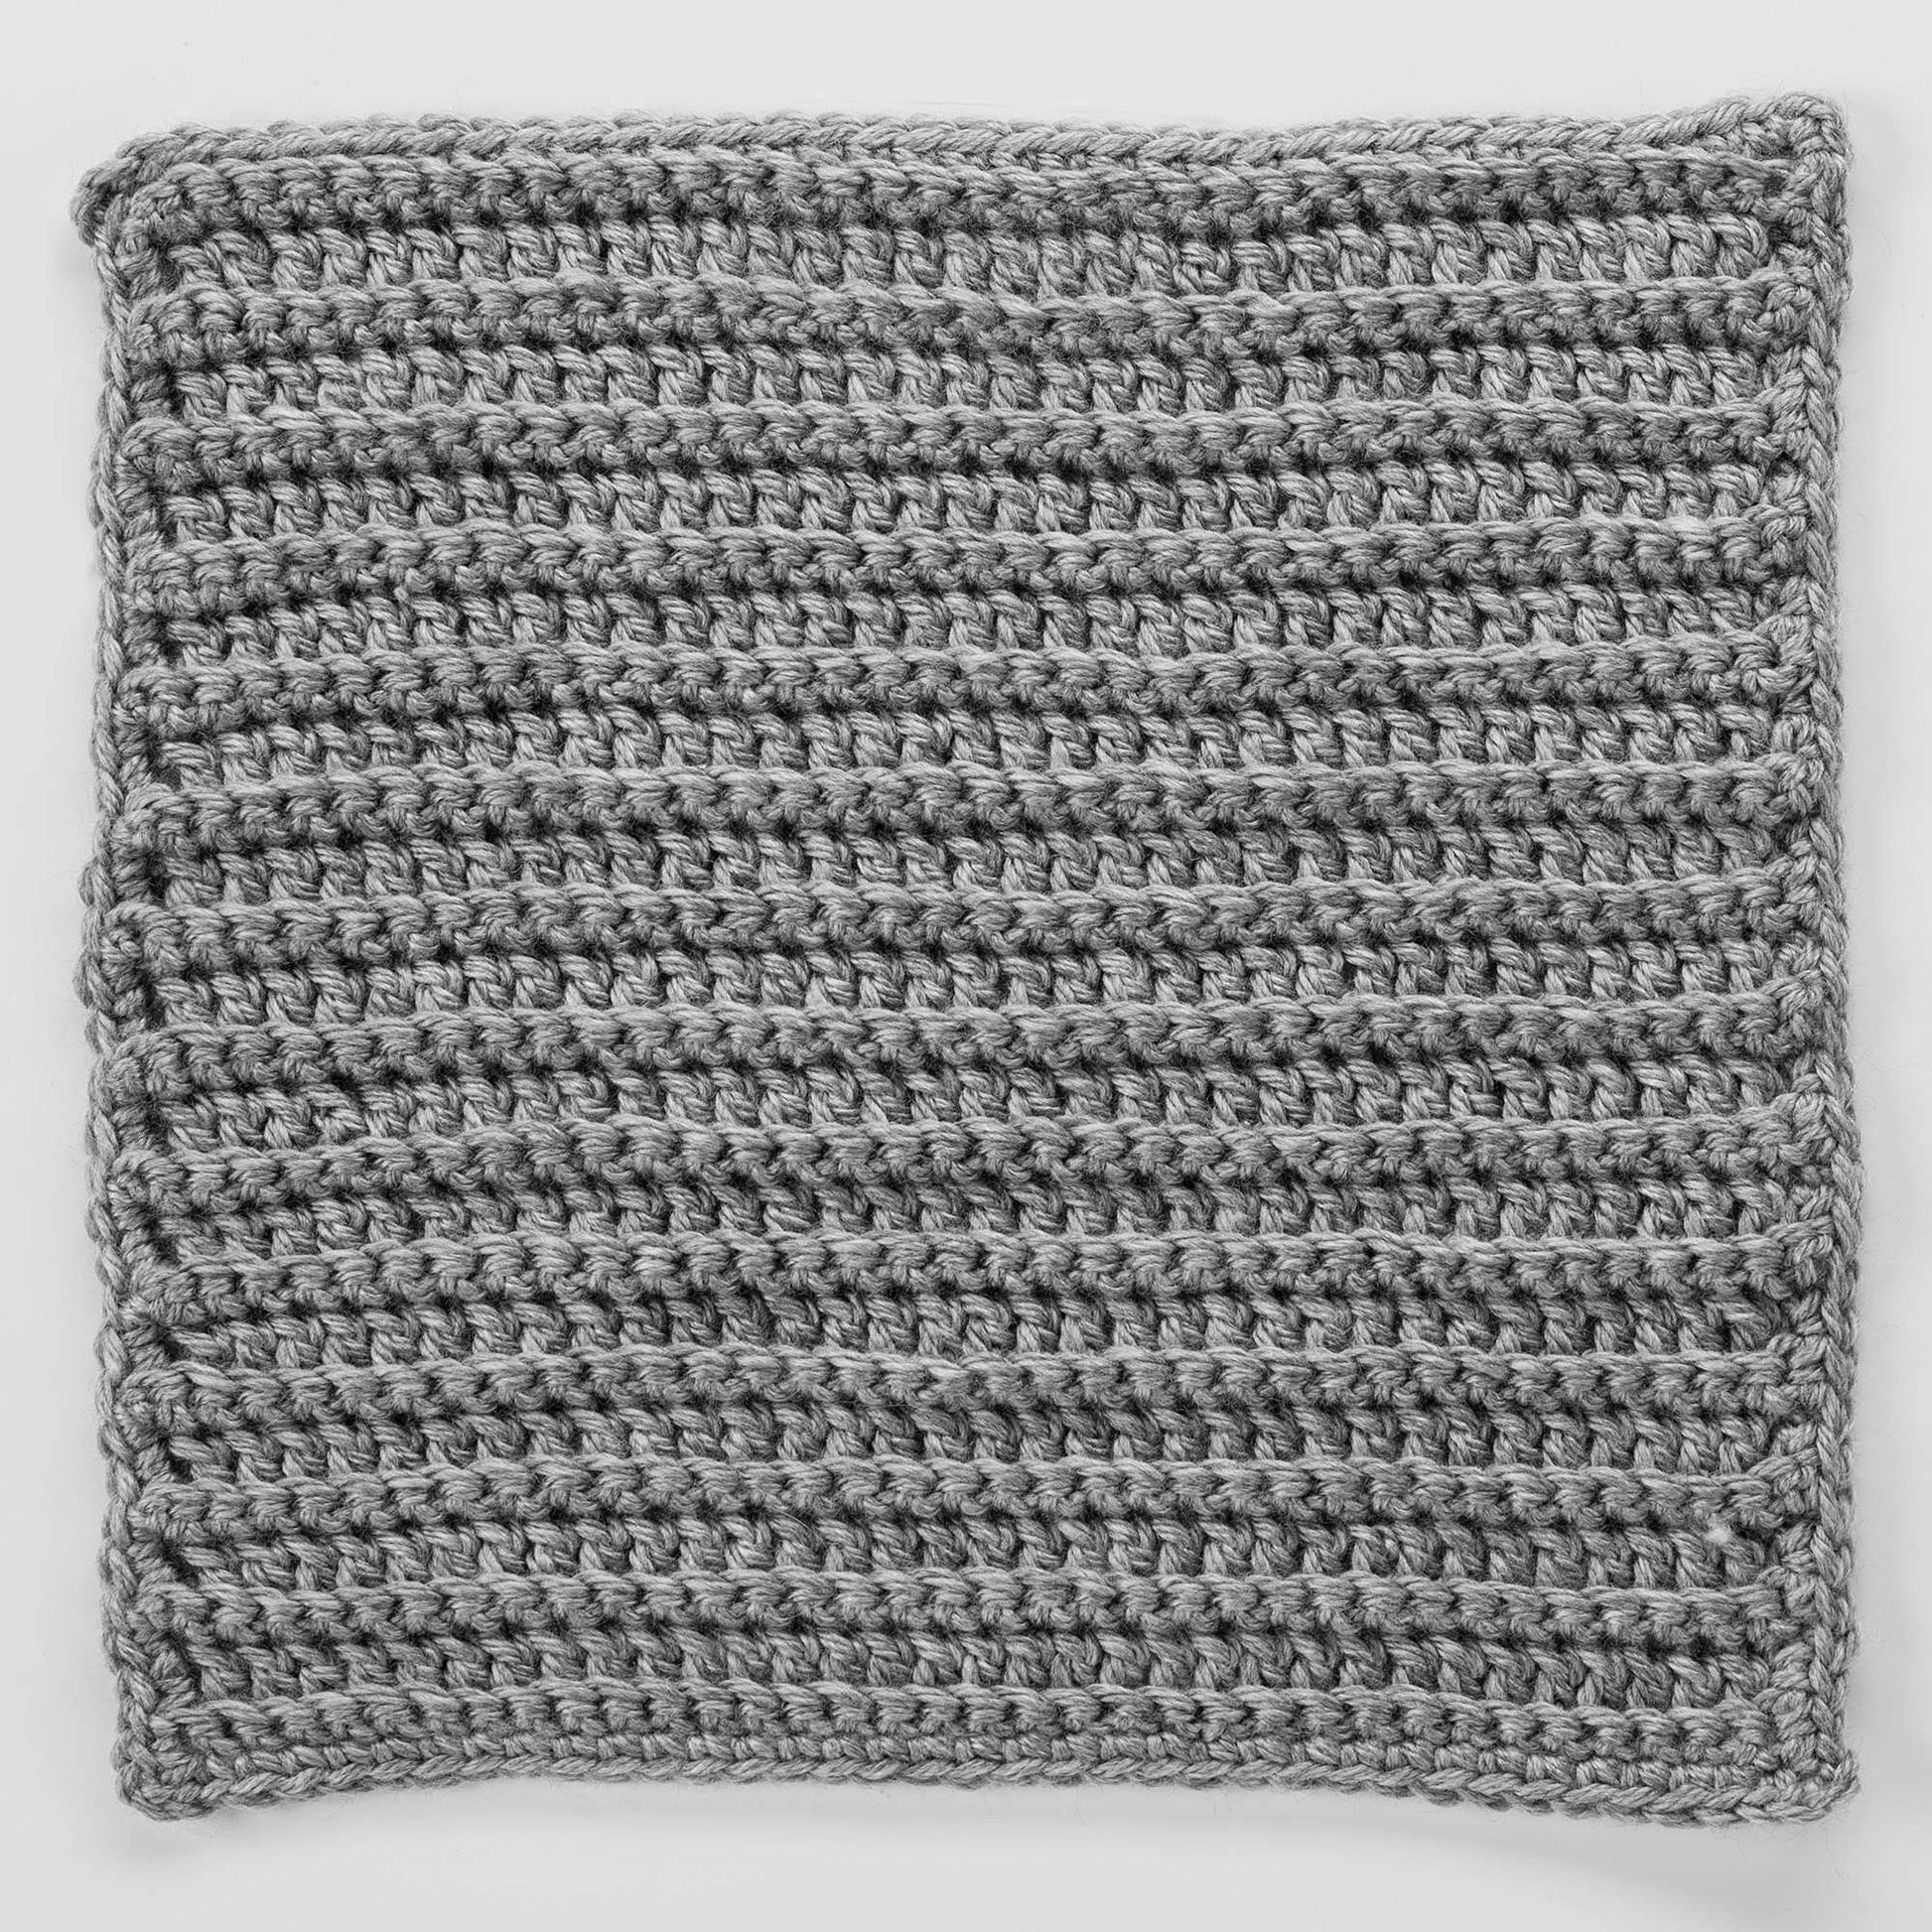 Free Red Heart Crochet Back Loops Square For Checkerboard Textures Throw Pattern